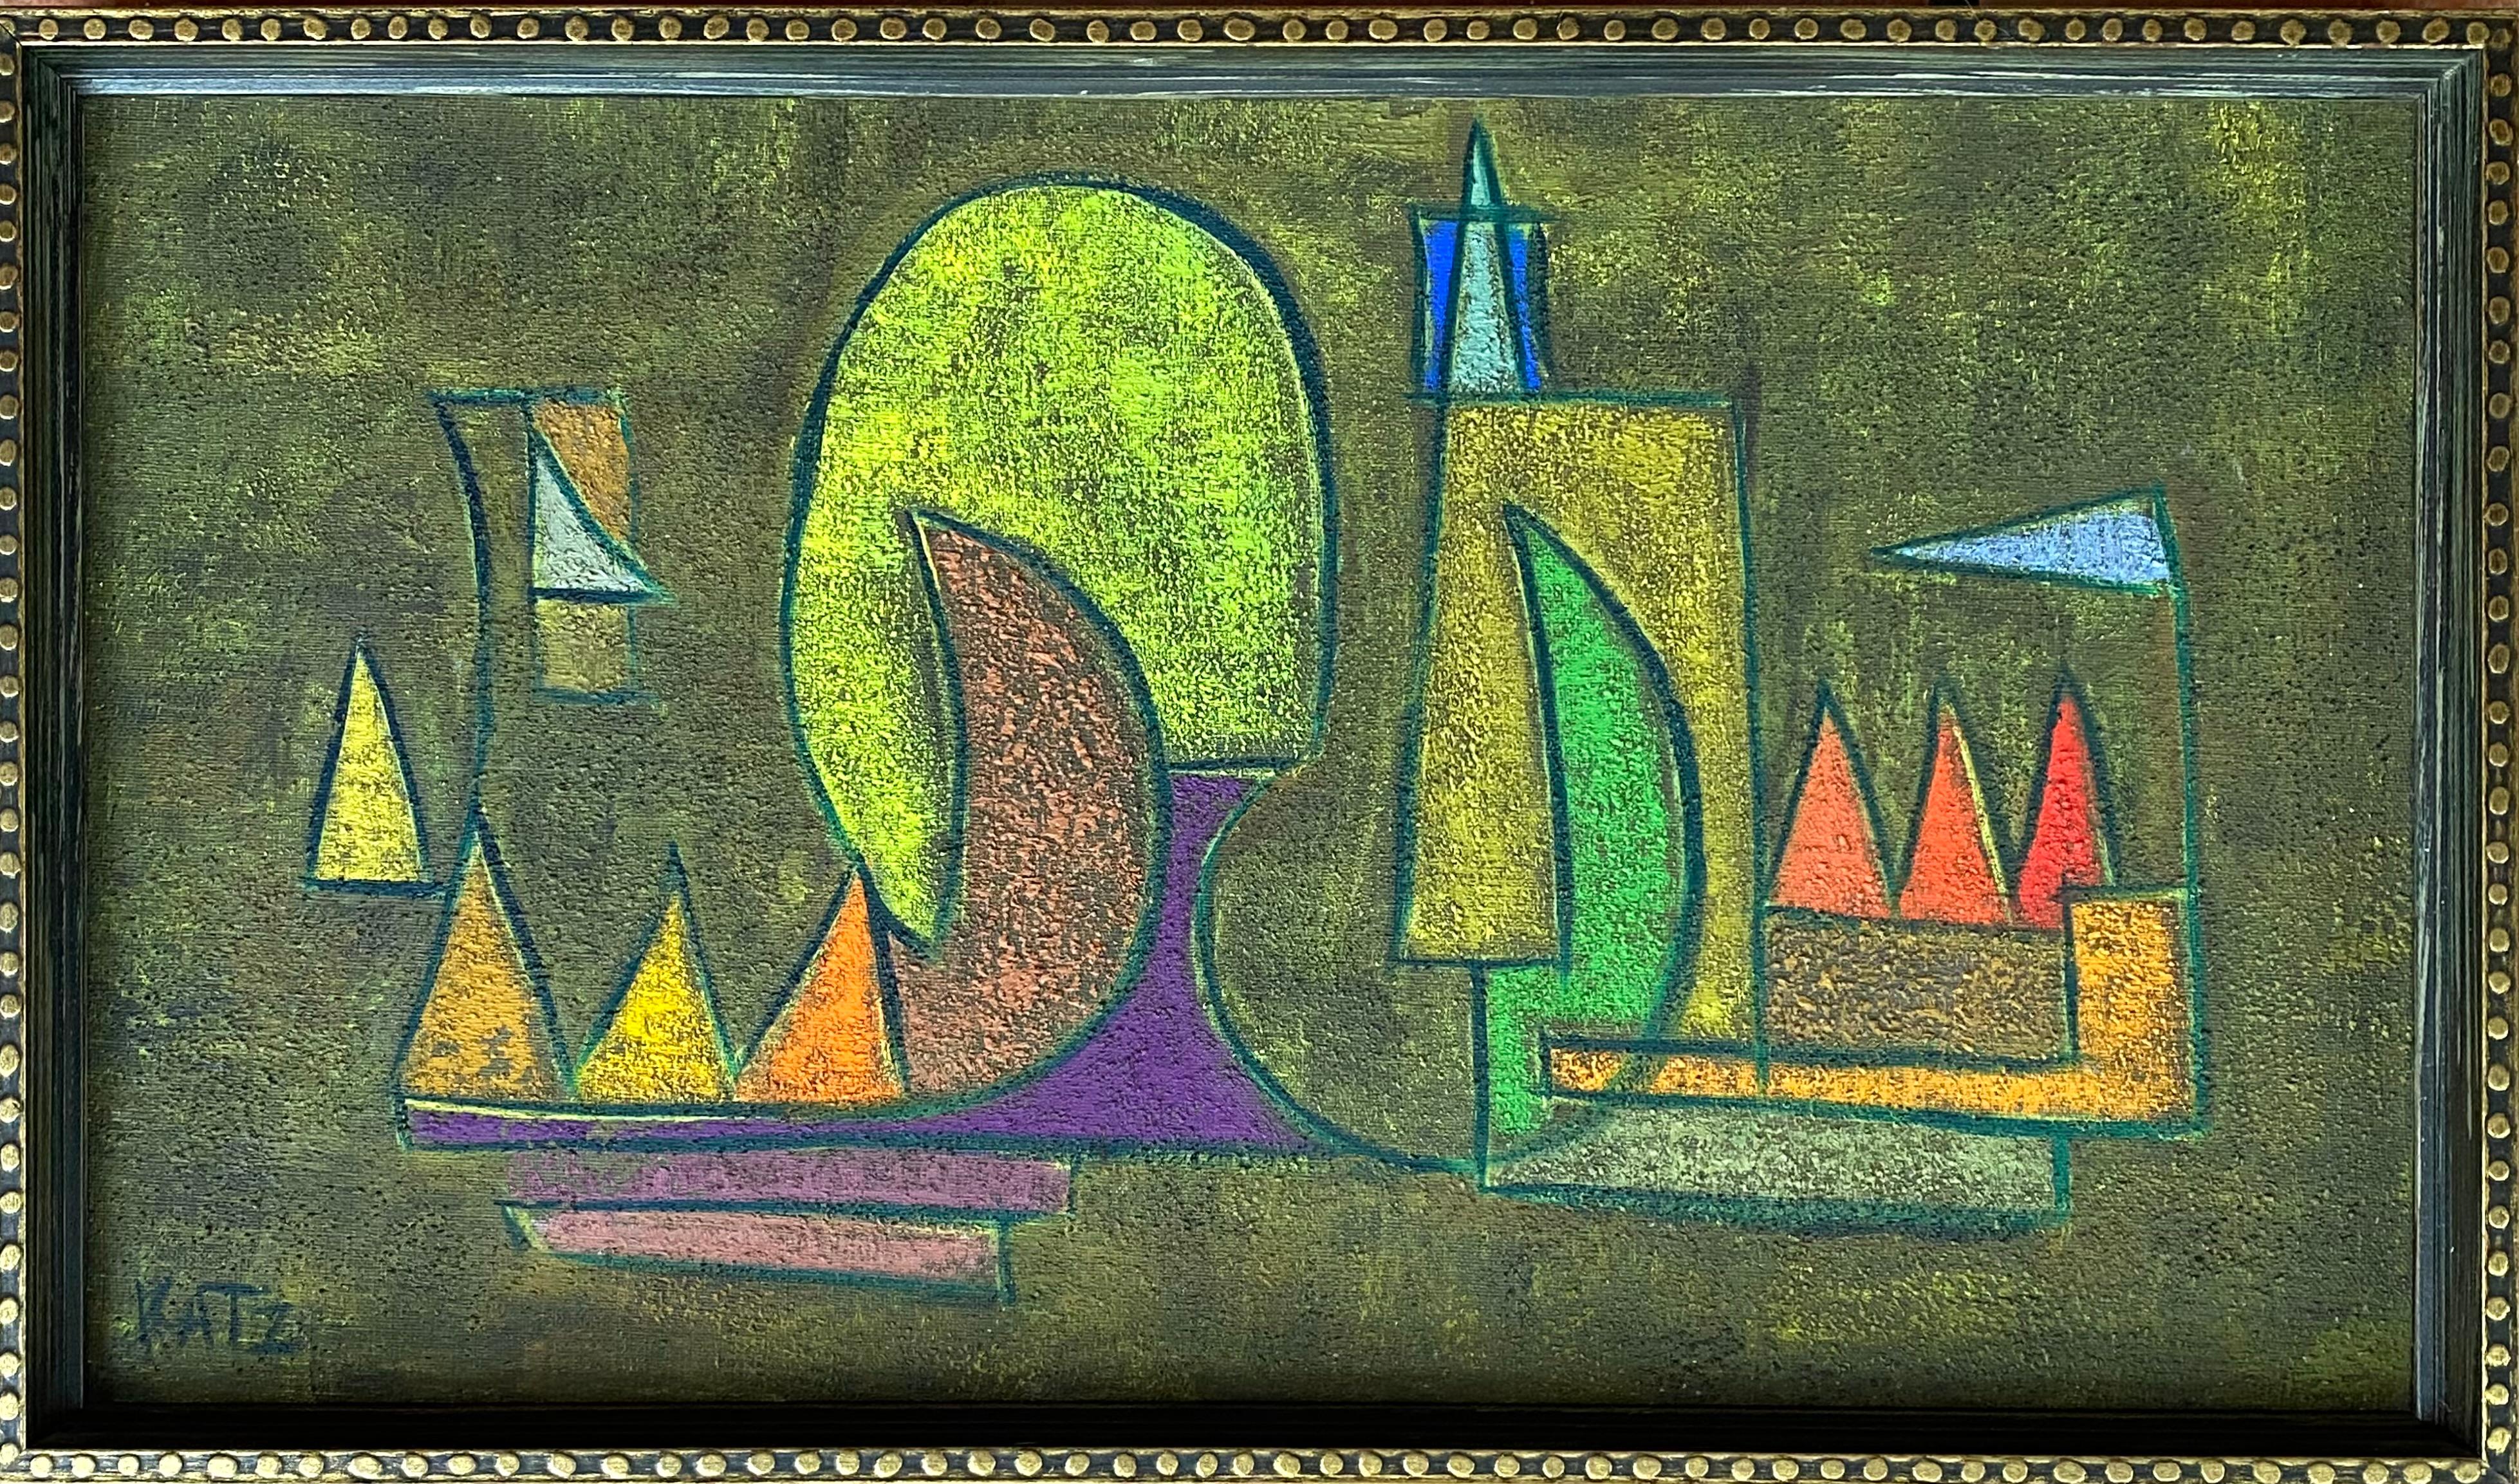 “Abstract Sailboats” - Painting by William Katz